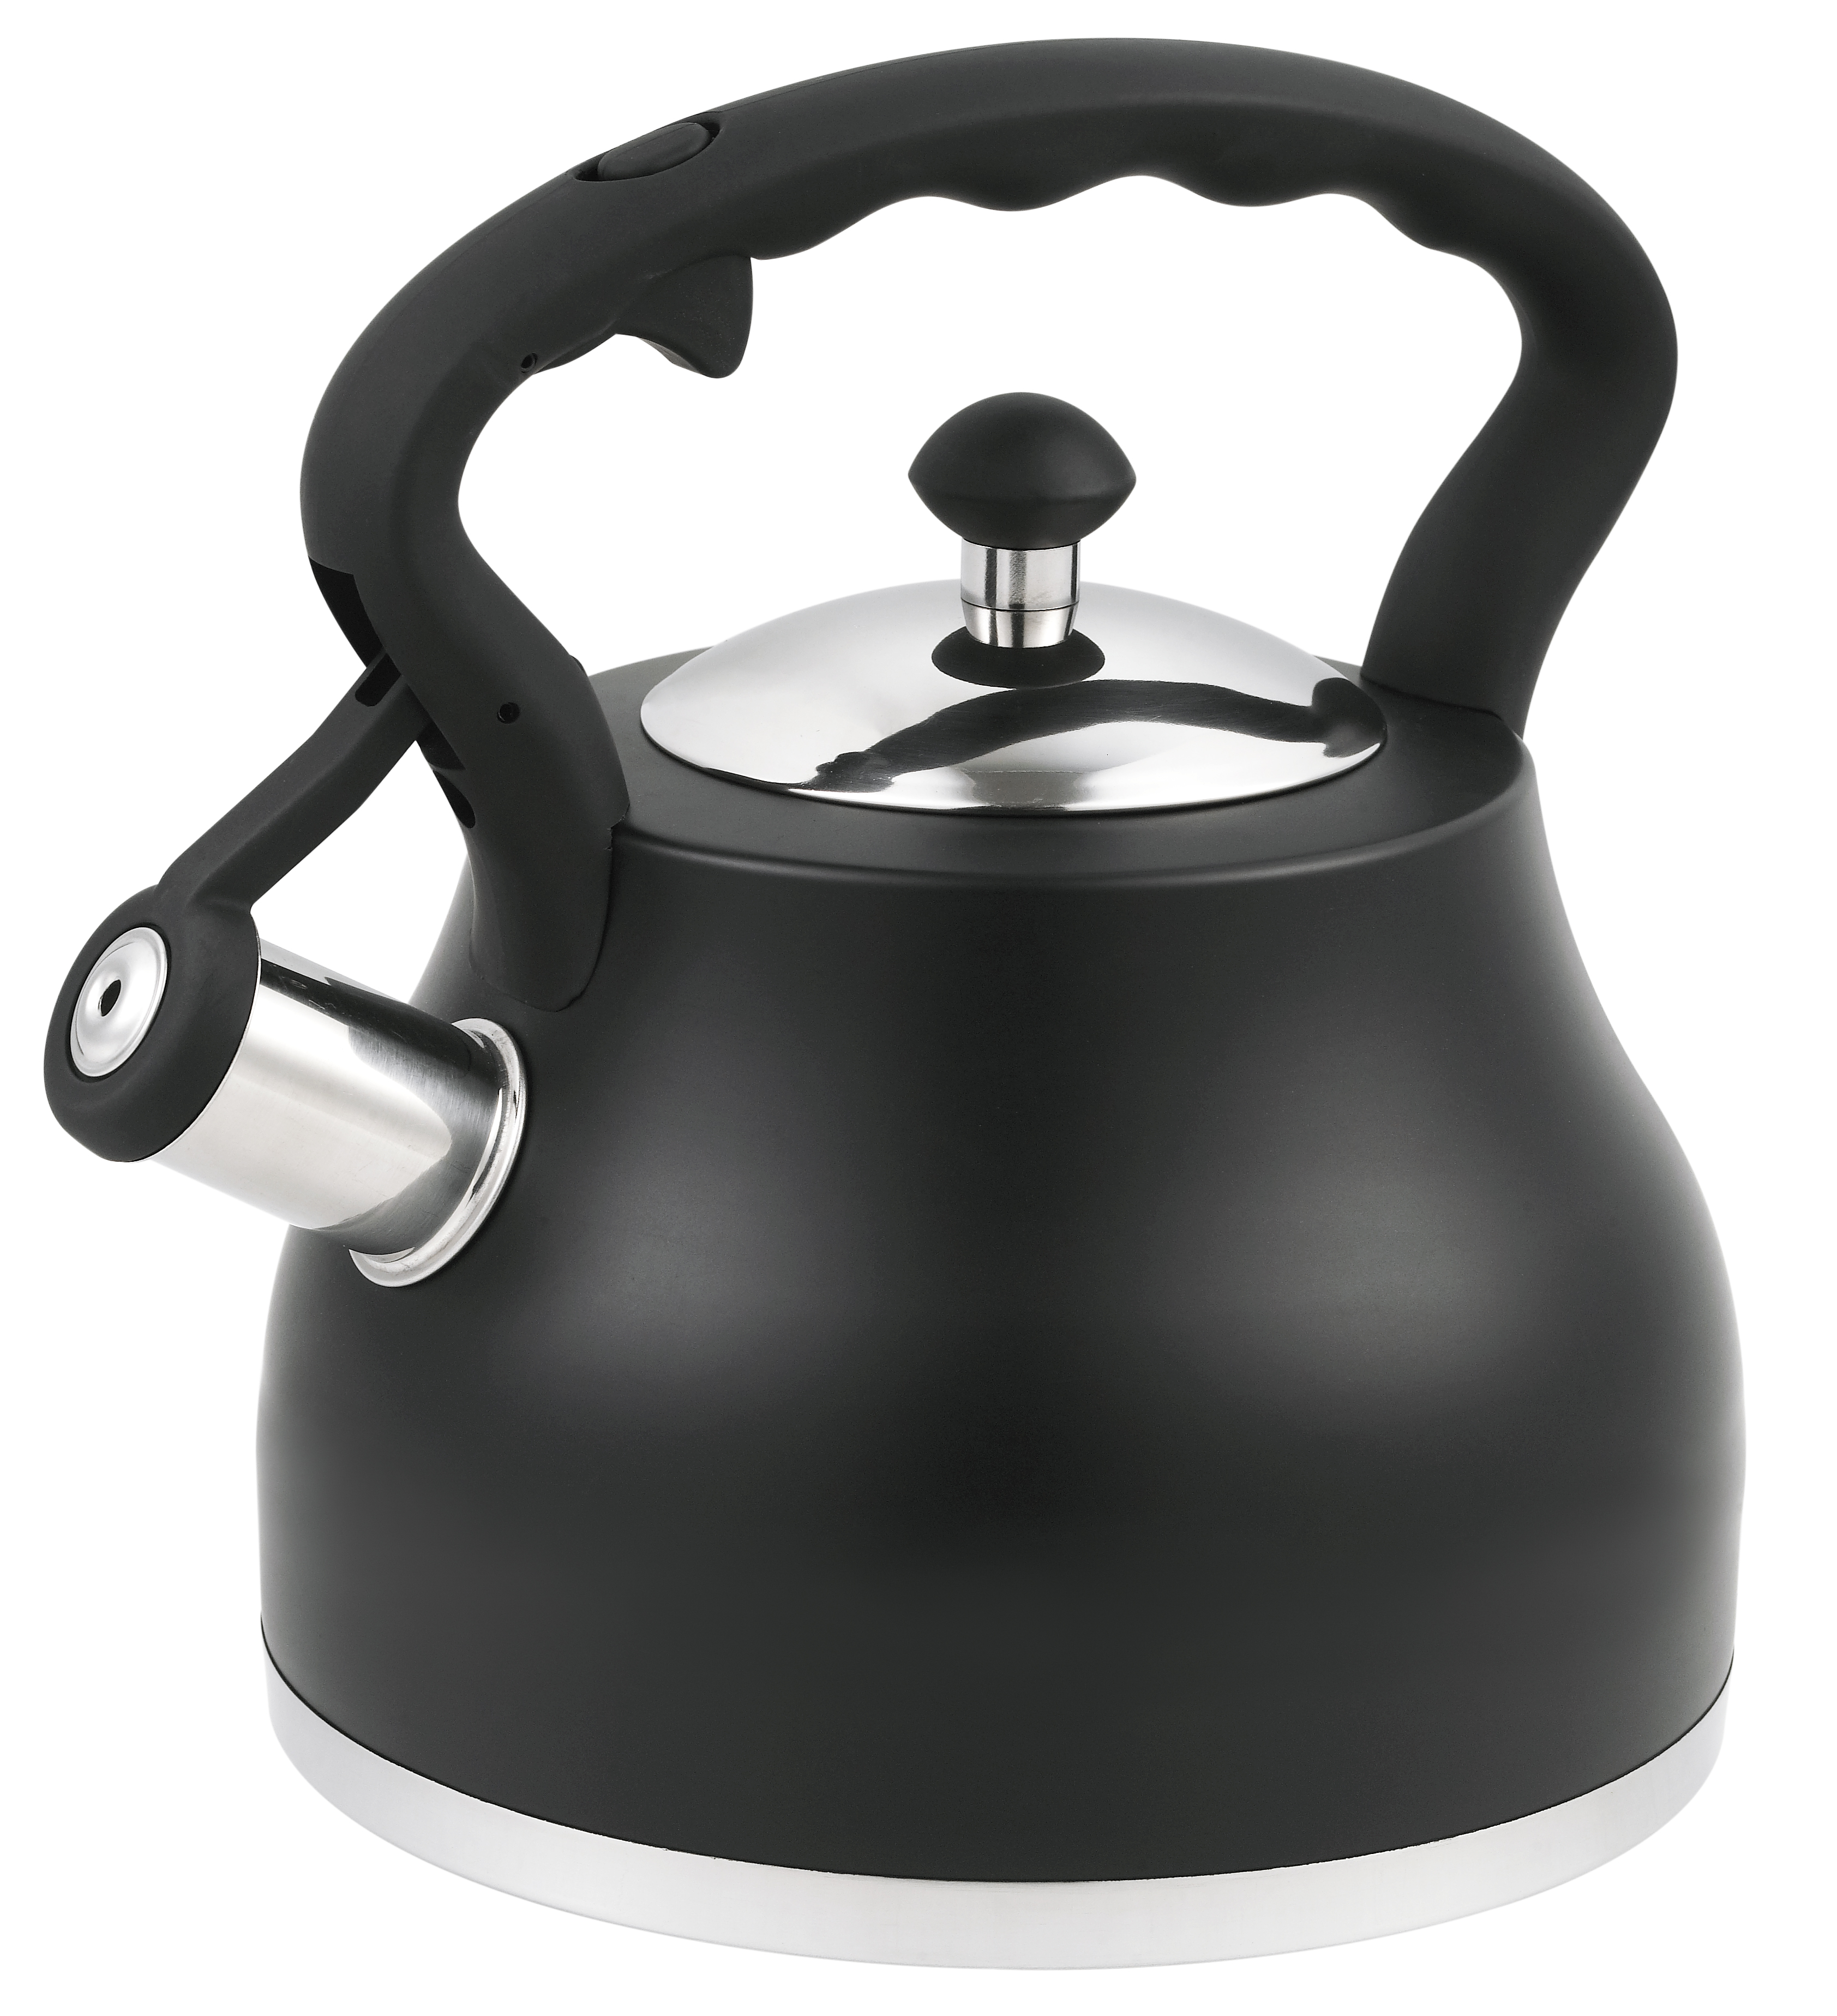 2.7L Food Grade Stainless Steel Whistling Kettle with Heat-proof Handle